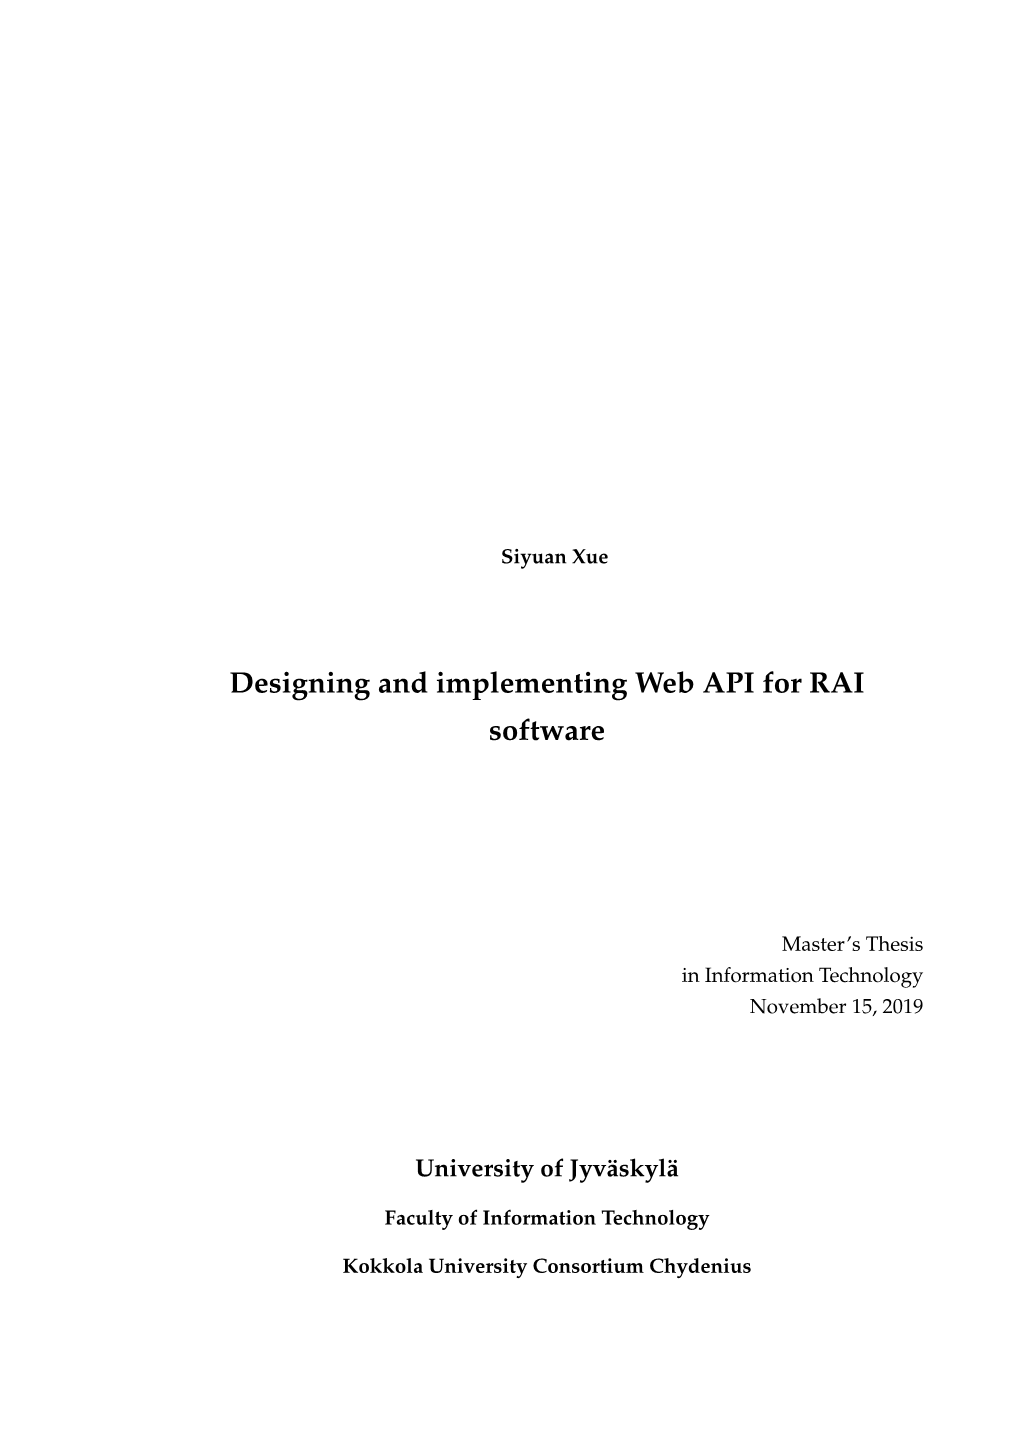 Designing and Implementing Web API for RAI Software